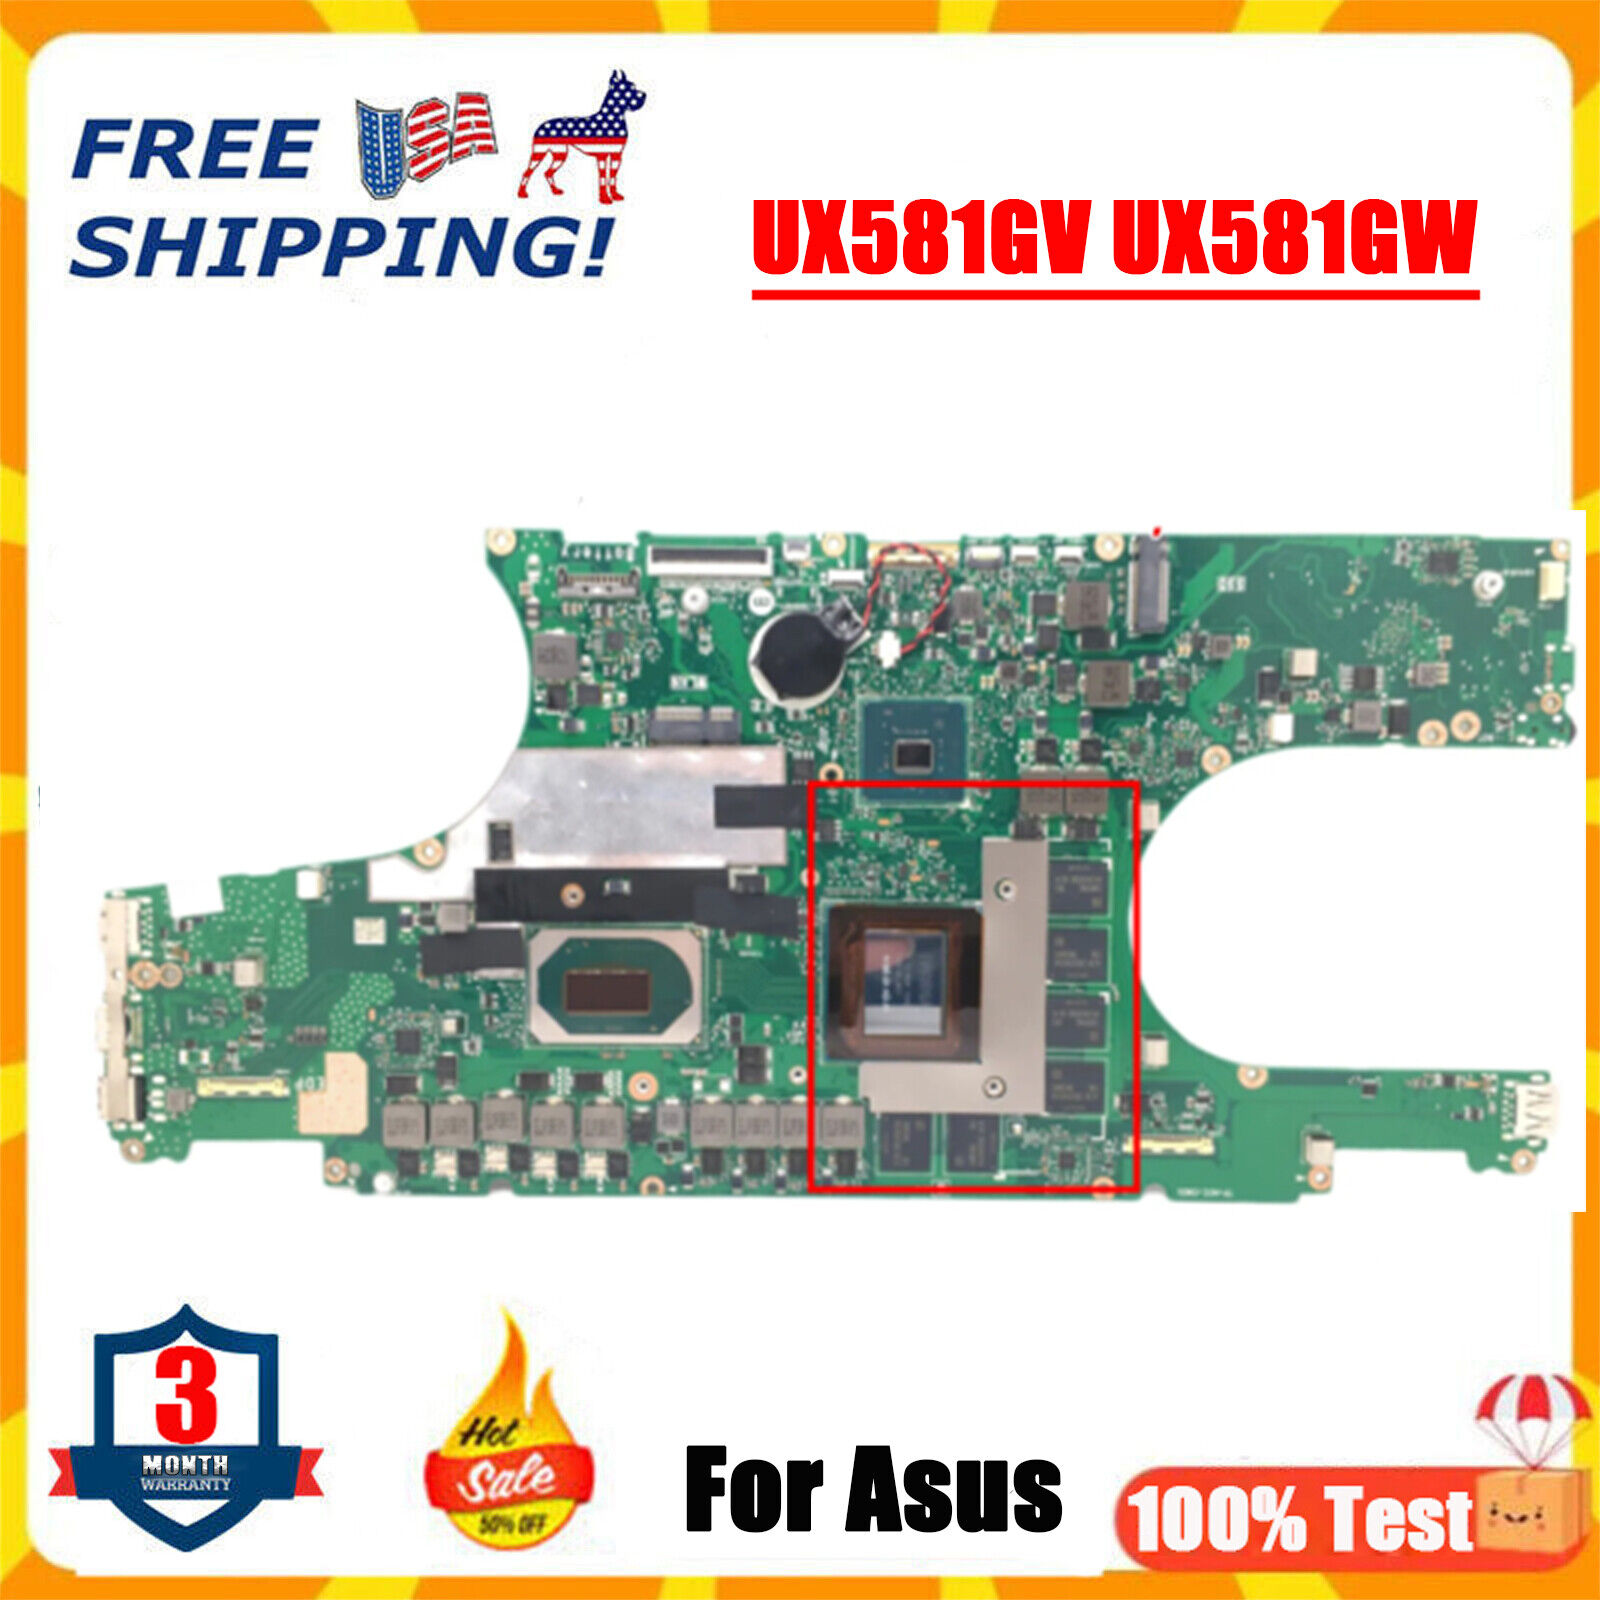 For ASUS ZenBook Pro UX581GV UX581GW motherboard 32GB I7 I9 CPU RTX2060-6GB   